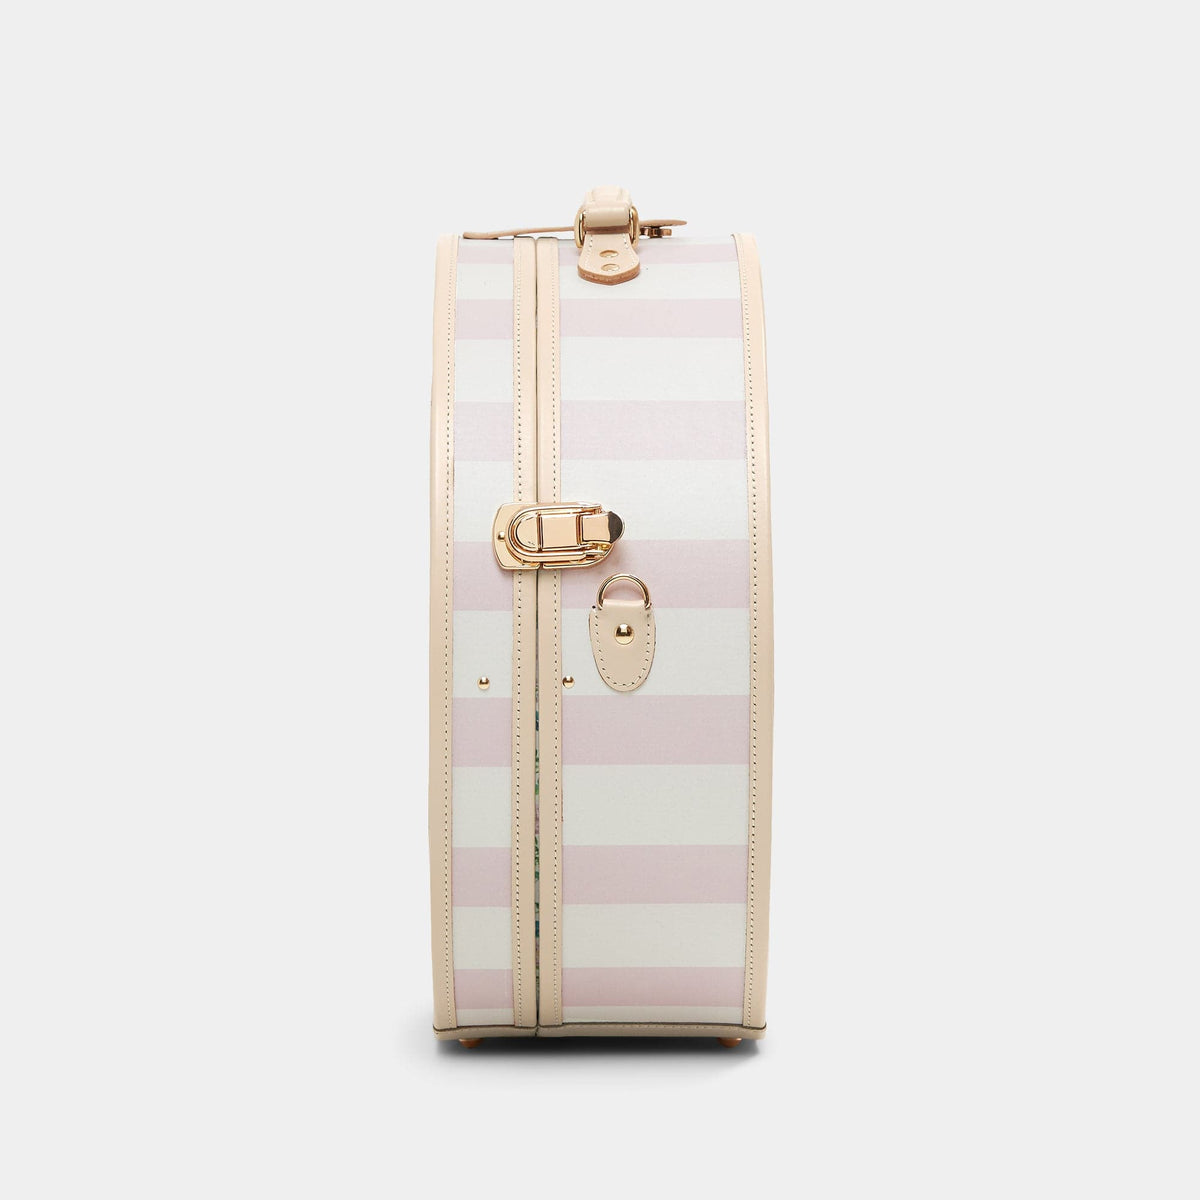 The Illustrator - Pink Hatbox Deluxe Hatbox Deluxe Steamline Luggage 